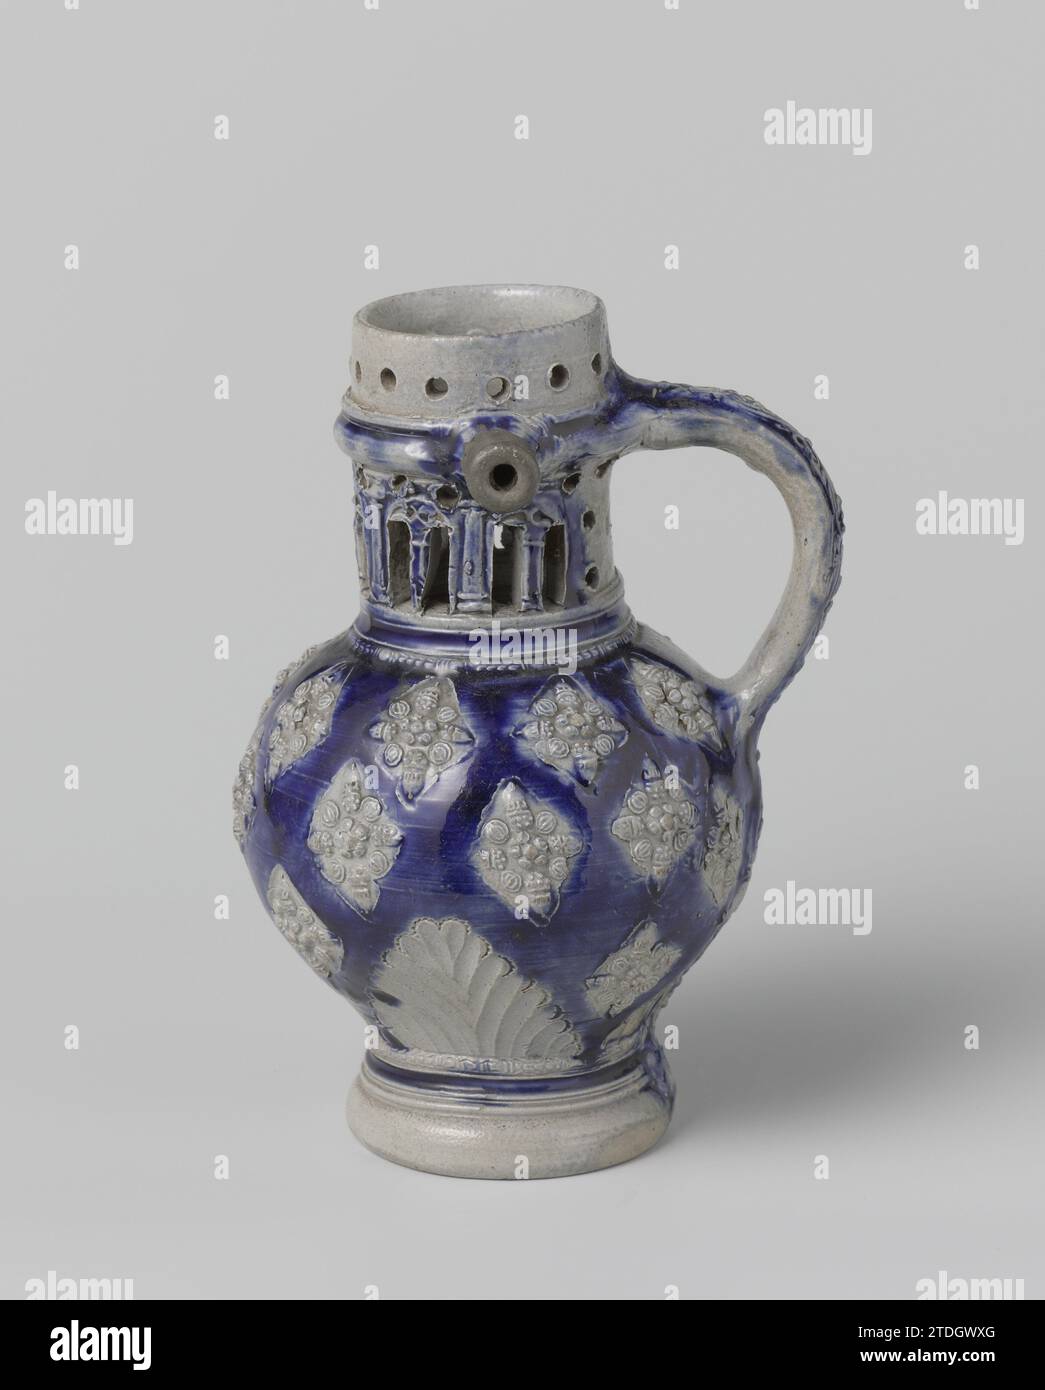 Jug with foliate ornaments and medallions, anonymous, c. 1650 - c. 1724 Can (Fopkan) of stoneware on high foot with a spherical belly and openwork neck with just below the edge a short spout. The C-shaped ear is attached to the neck and shoulder. At the bottom of the jug there is a hole on the inside, so that the liquid can flow out through the spout through a tube in the wall, ear and edge. Partly covered with cobalt blue. On the abdomen, leaf motifs and small printed and imposed, diamond -shaped medallions with flowers in relief against a blue background. On the neck in relief pillars and wi Stock Photo